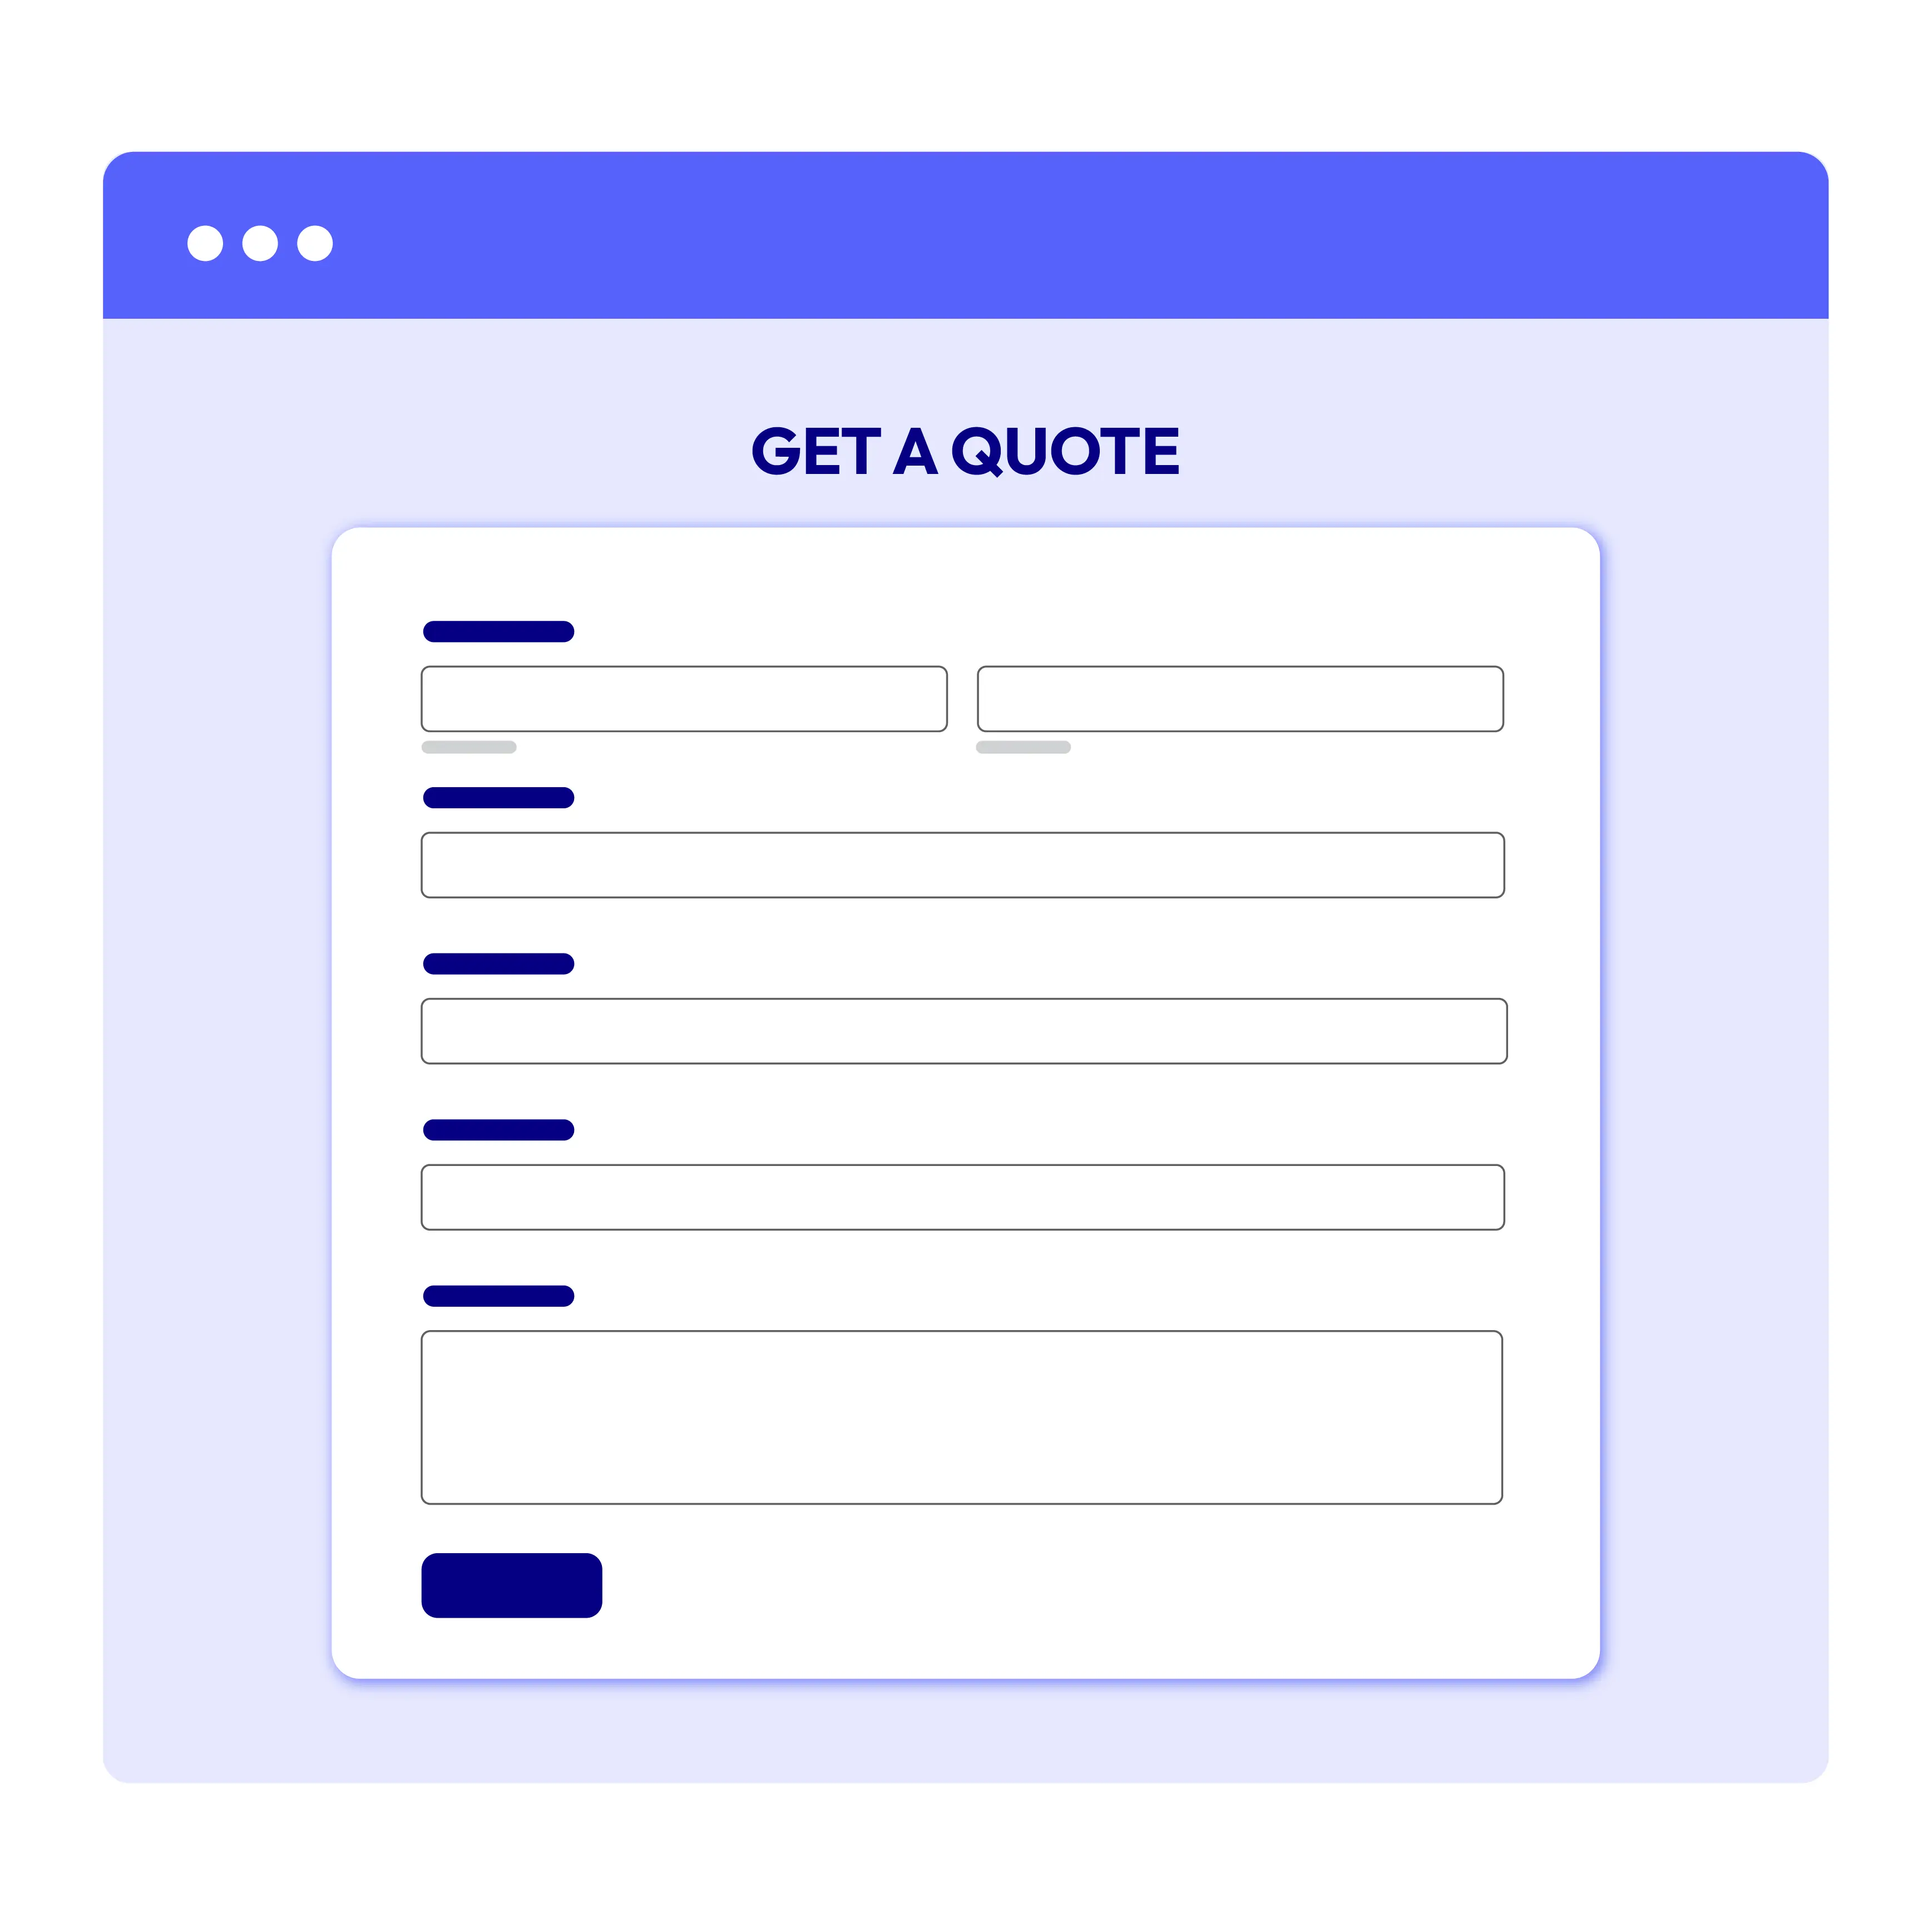 Create “Get a quote” form